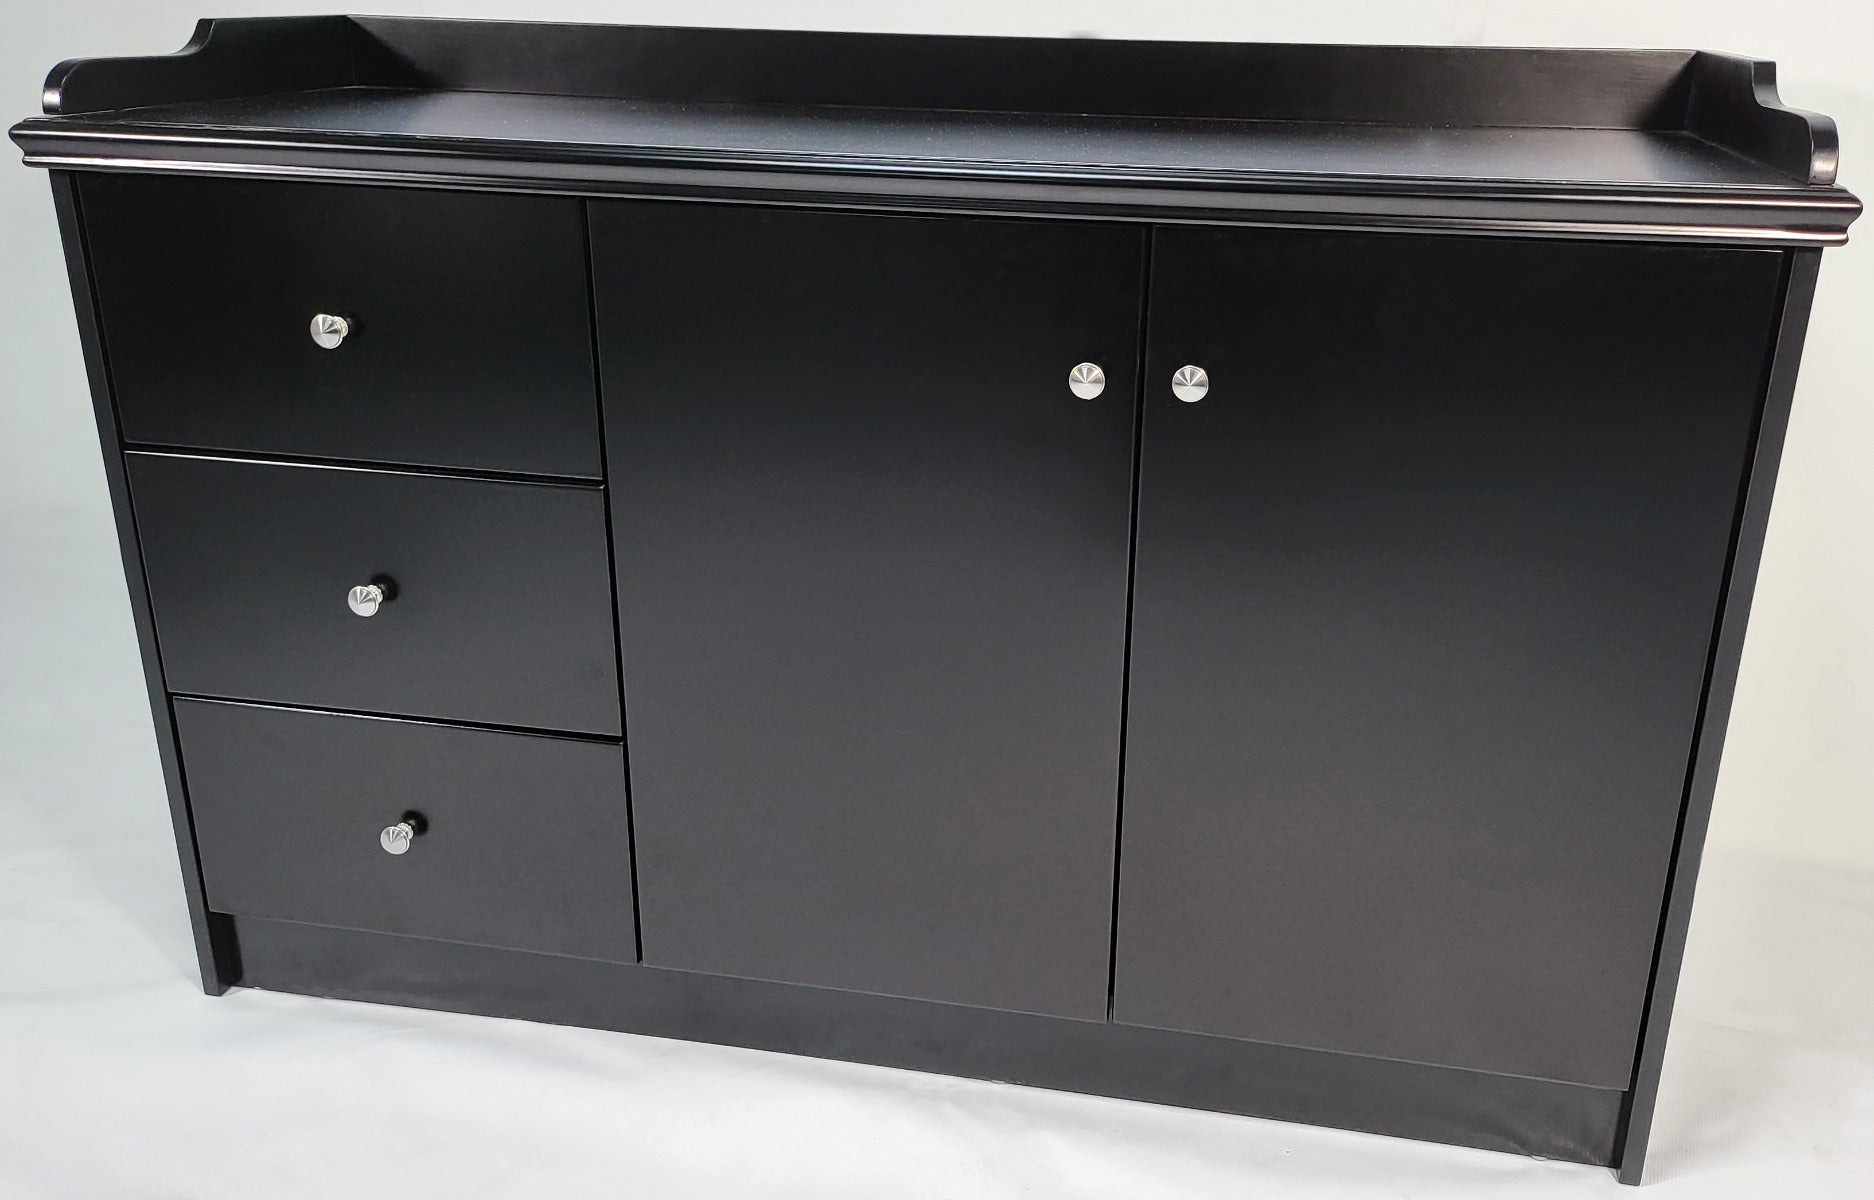 120cm Wide Black Cupboard with Integrated Drawers - 2K01 Huddersfield